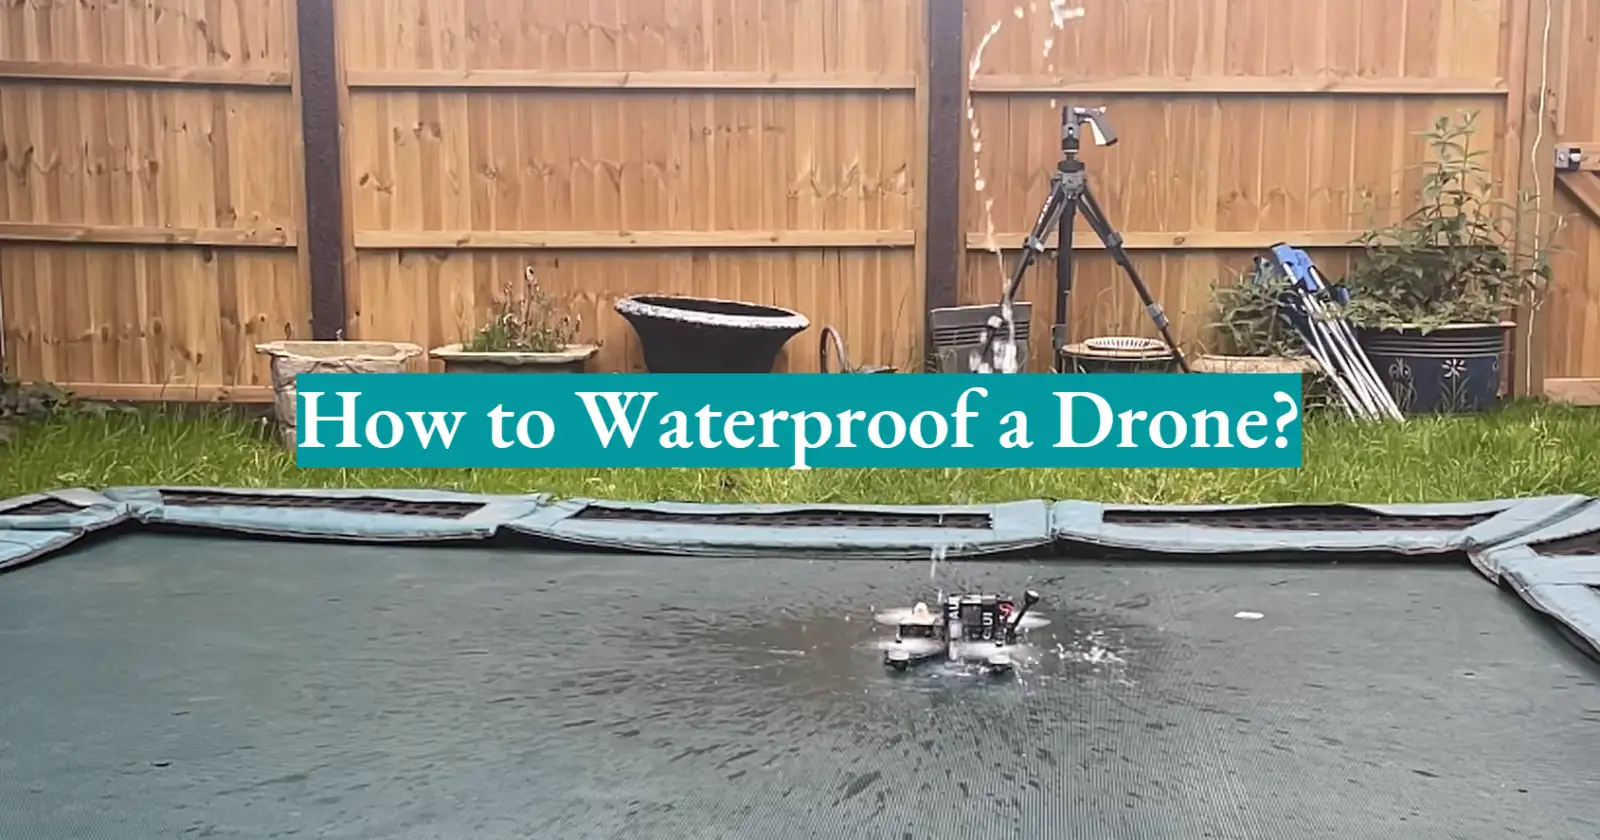 How to Waterproof a Drone?